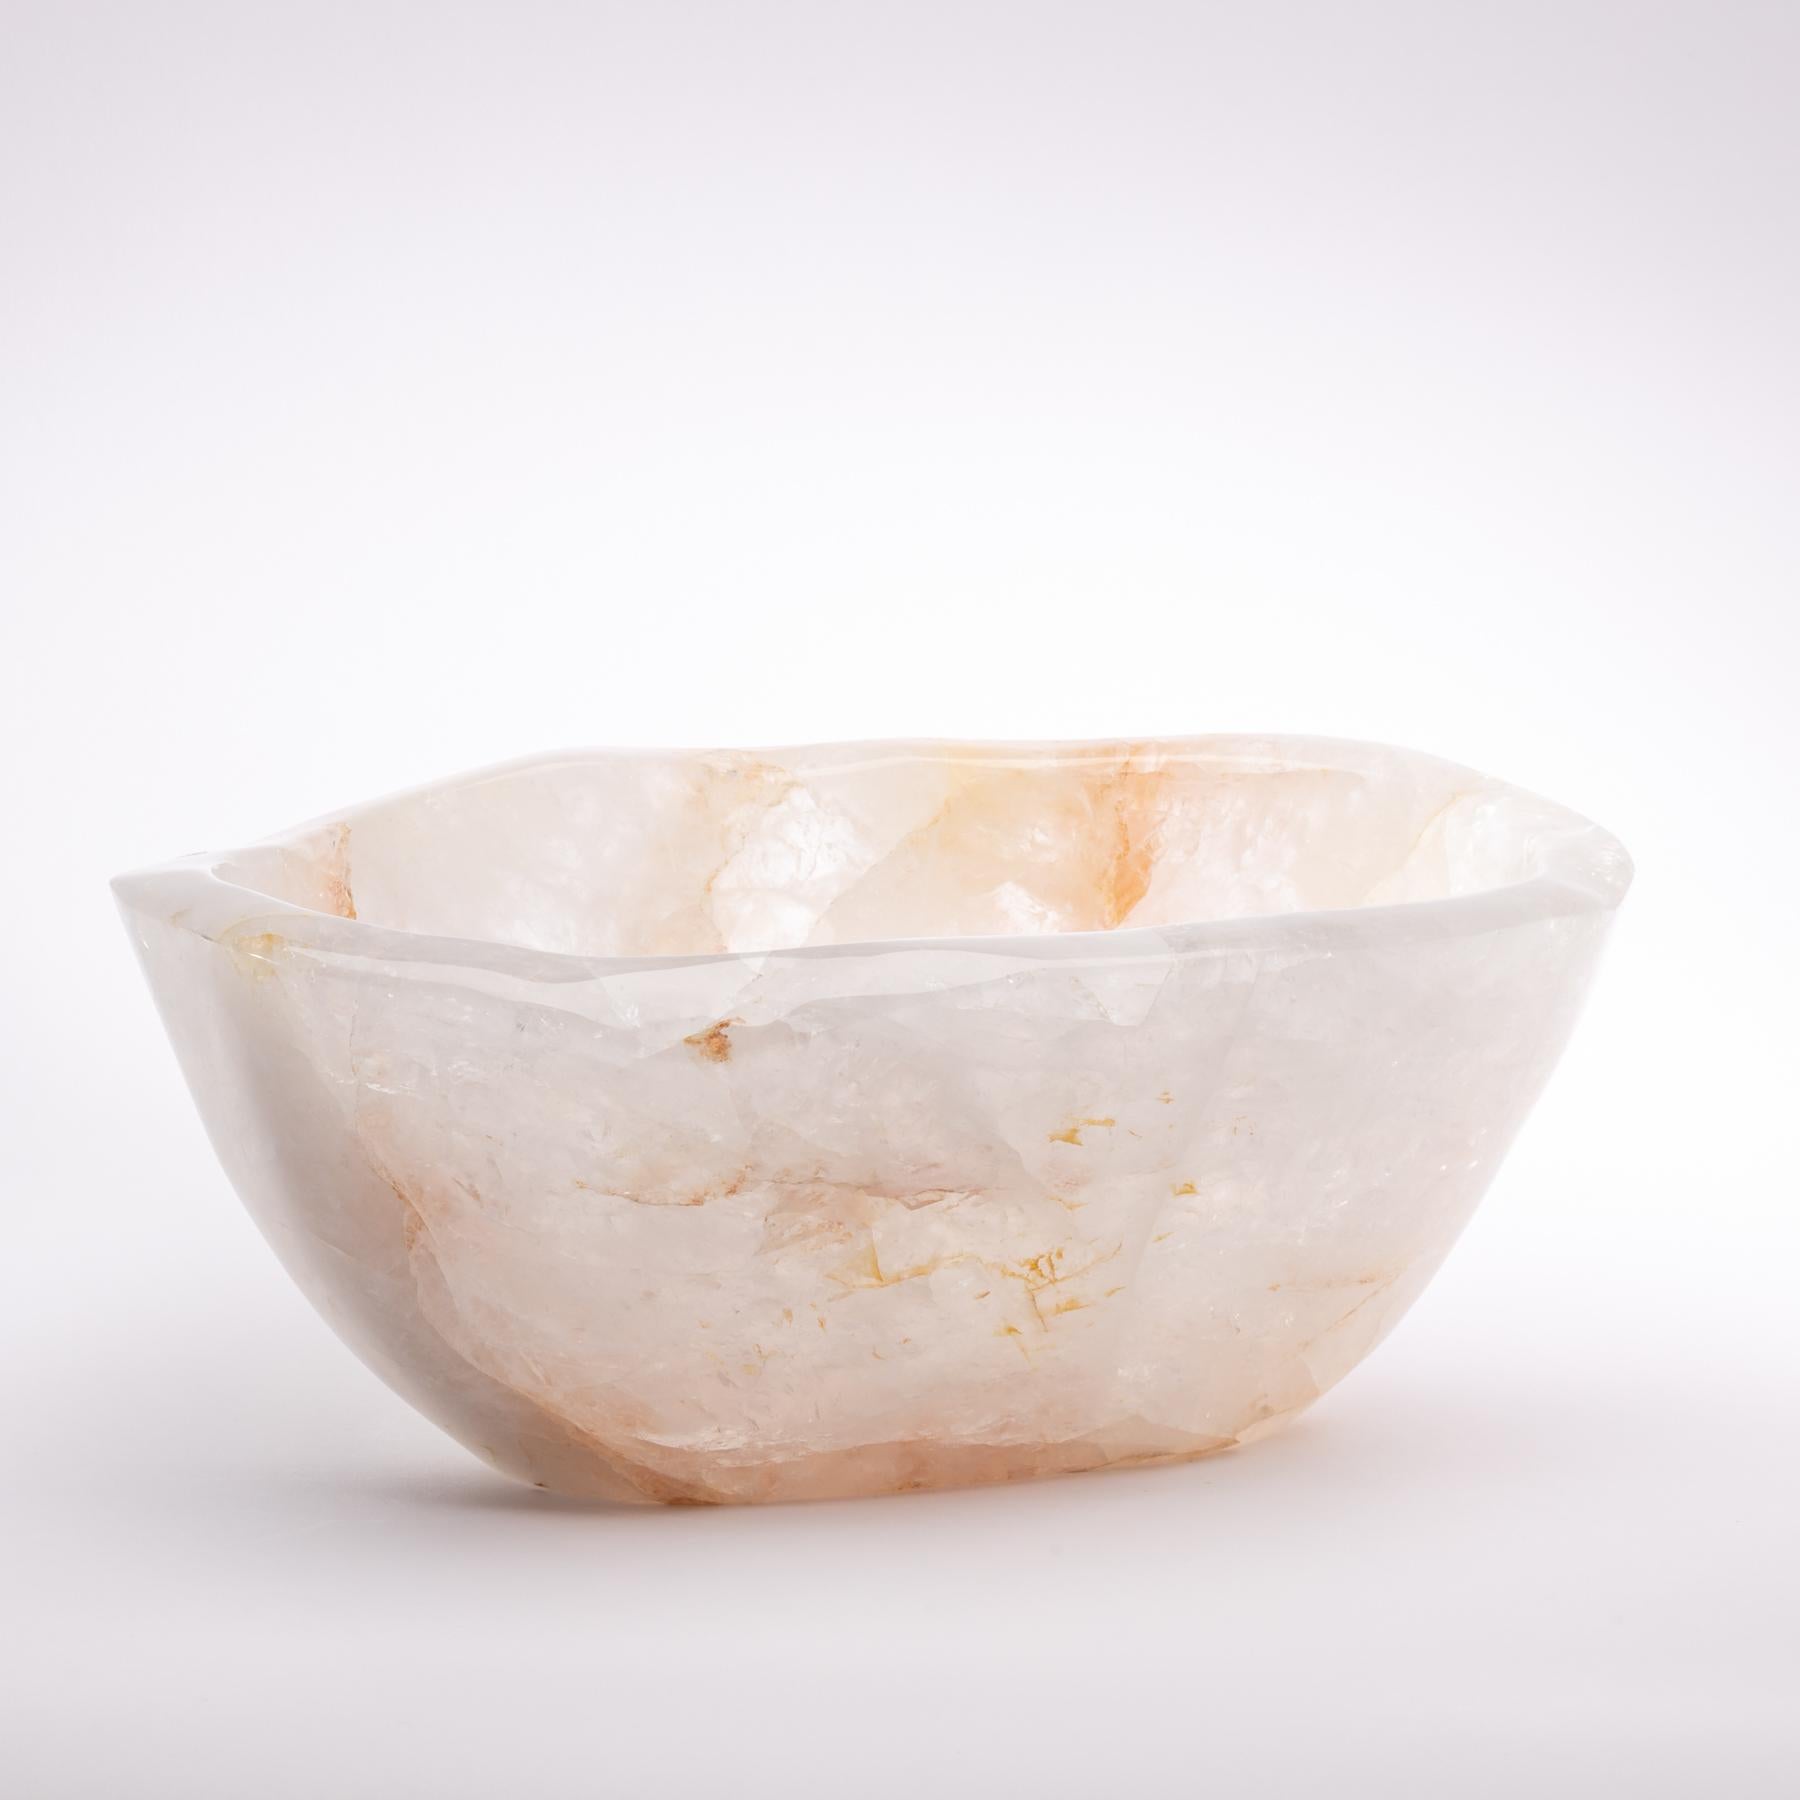 Organic Modern Large Clear Quartz Bowl from Madagascar Perfect for Wine and Champagne Cooler